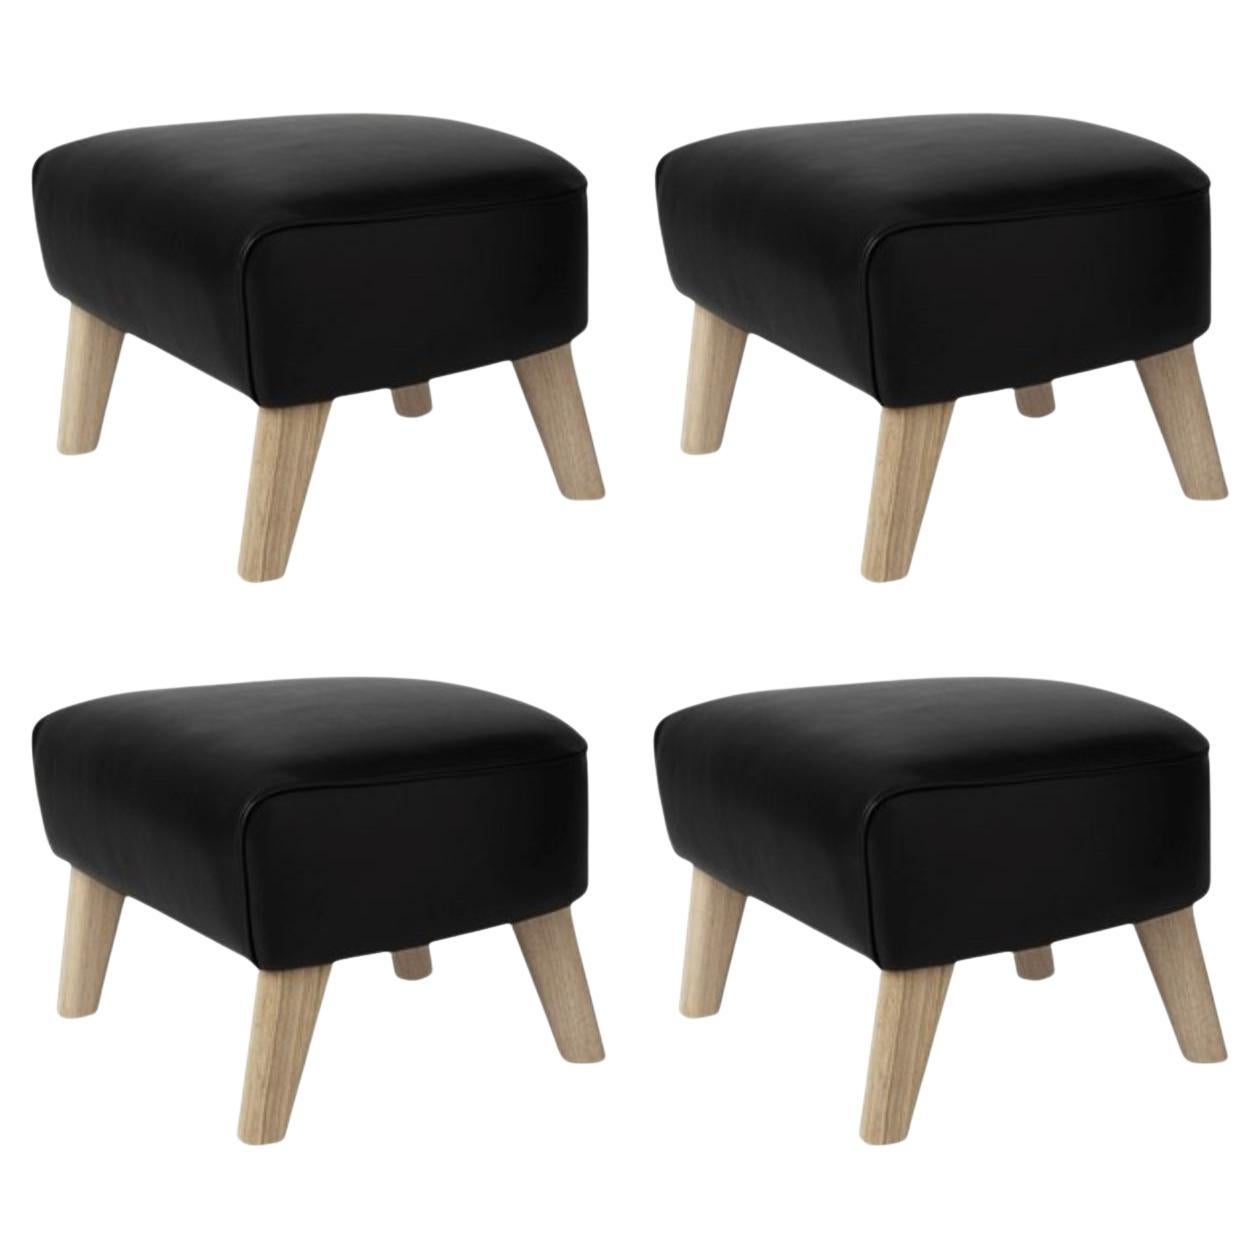 Set of 4 Black Leather and Natural Oak My Own Chair Footstools by Lassen For Sale